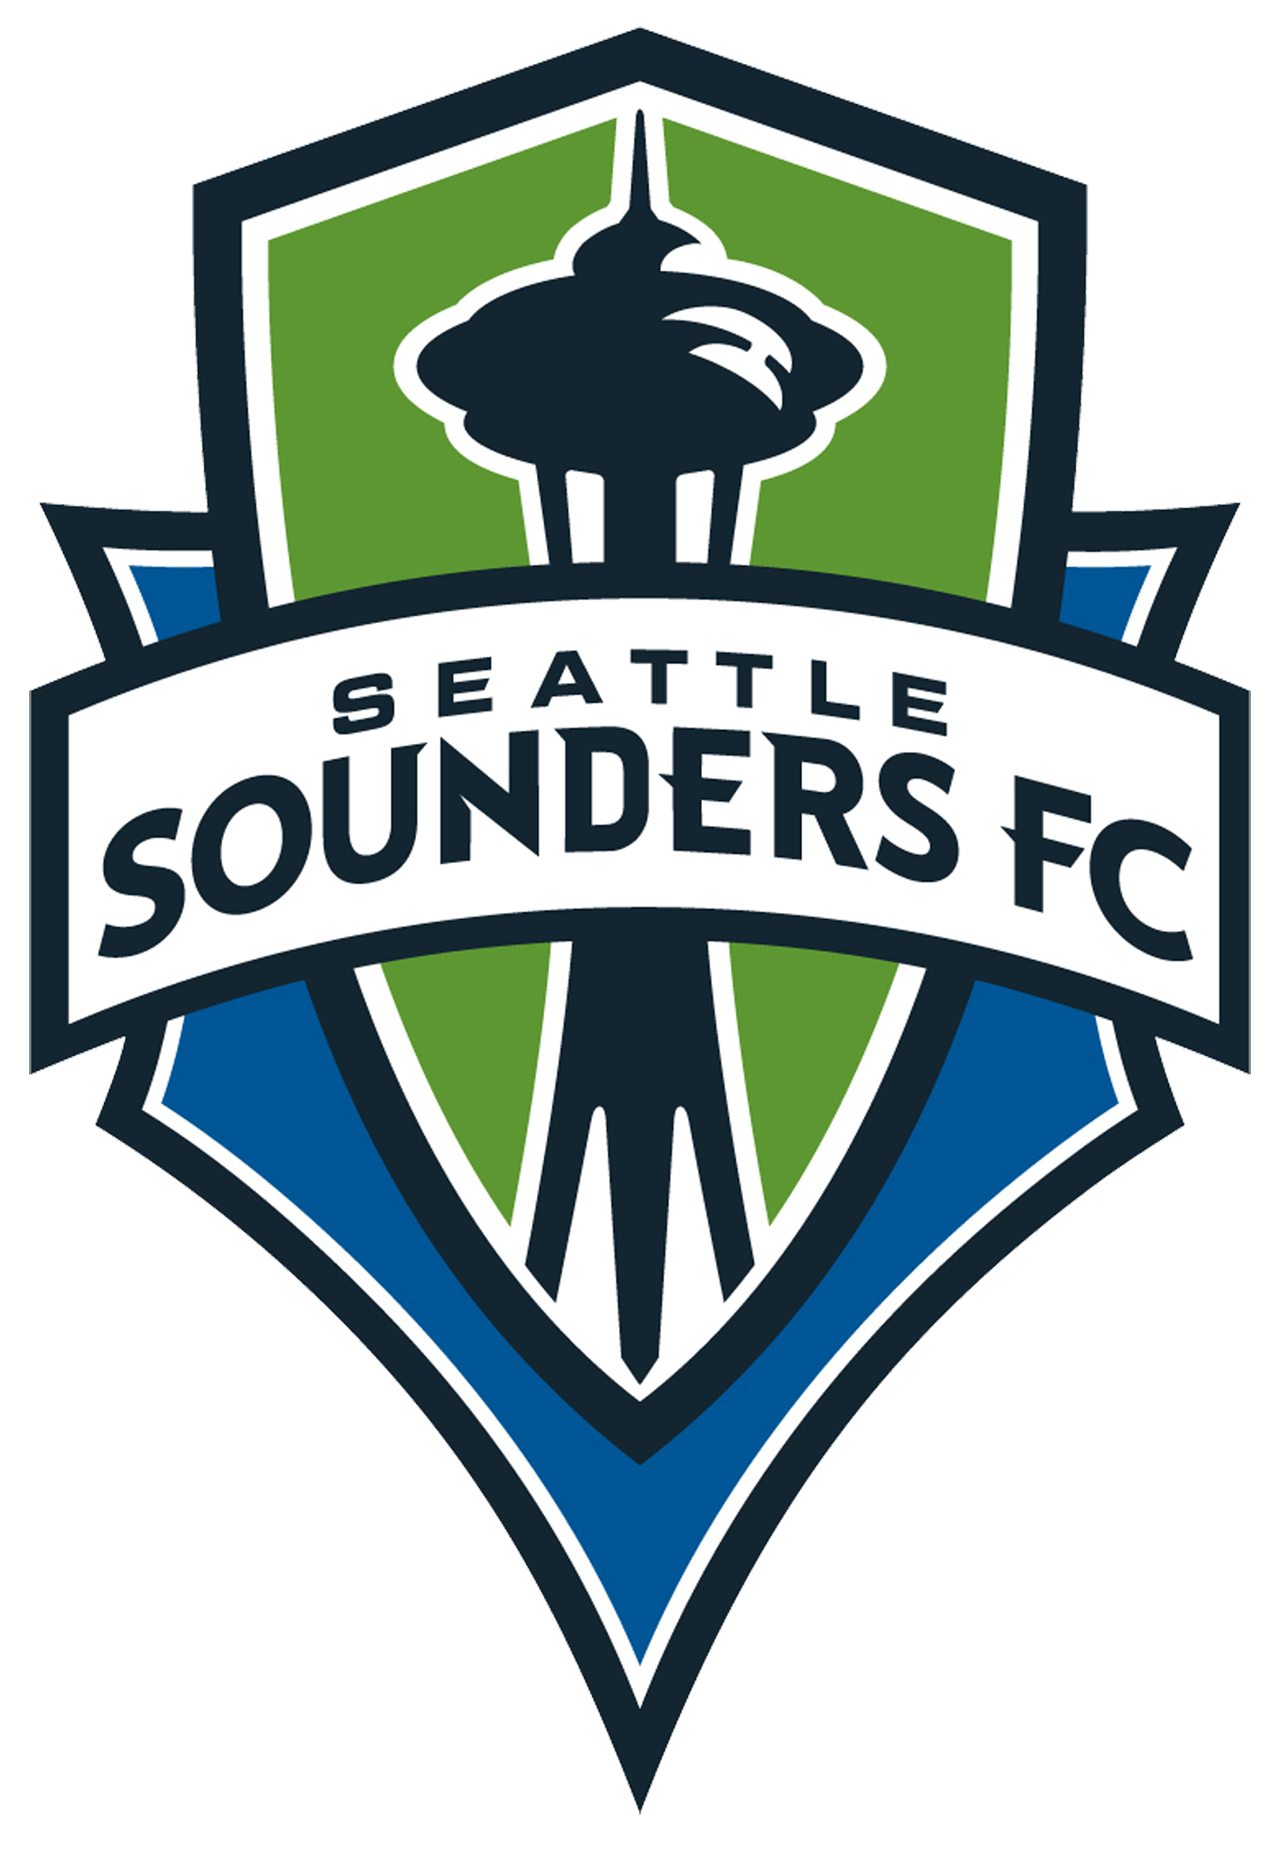 Seattle sounders logo fc logo Wallpaper wallpaper, Football Pictures and